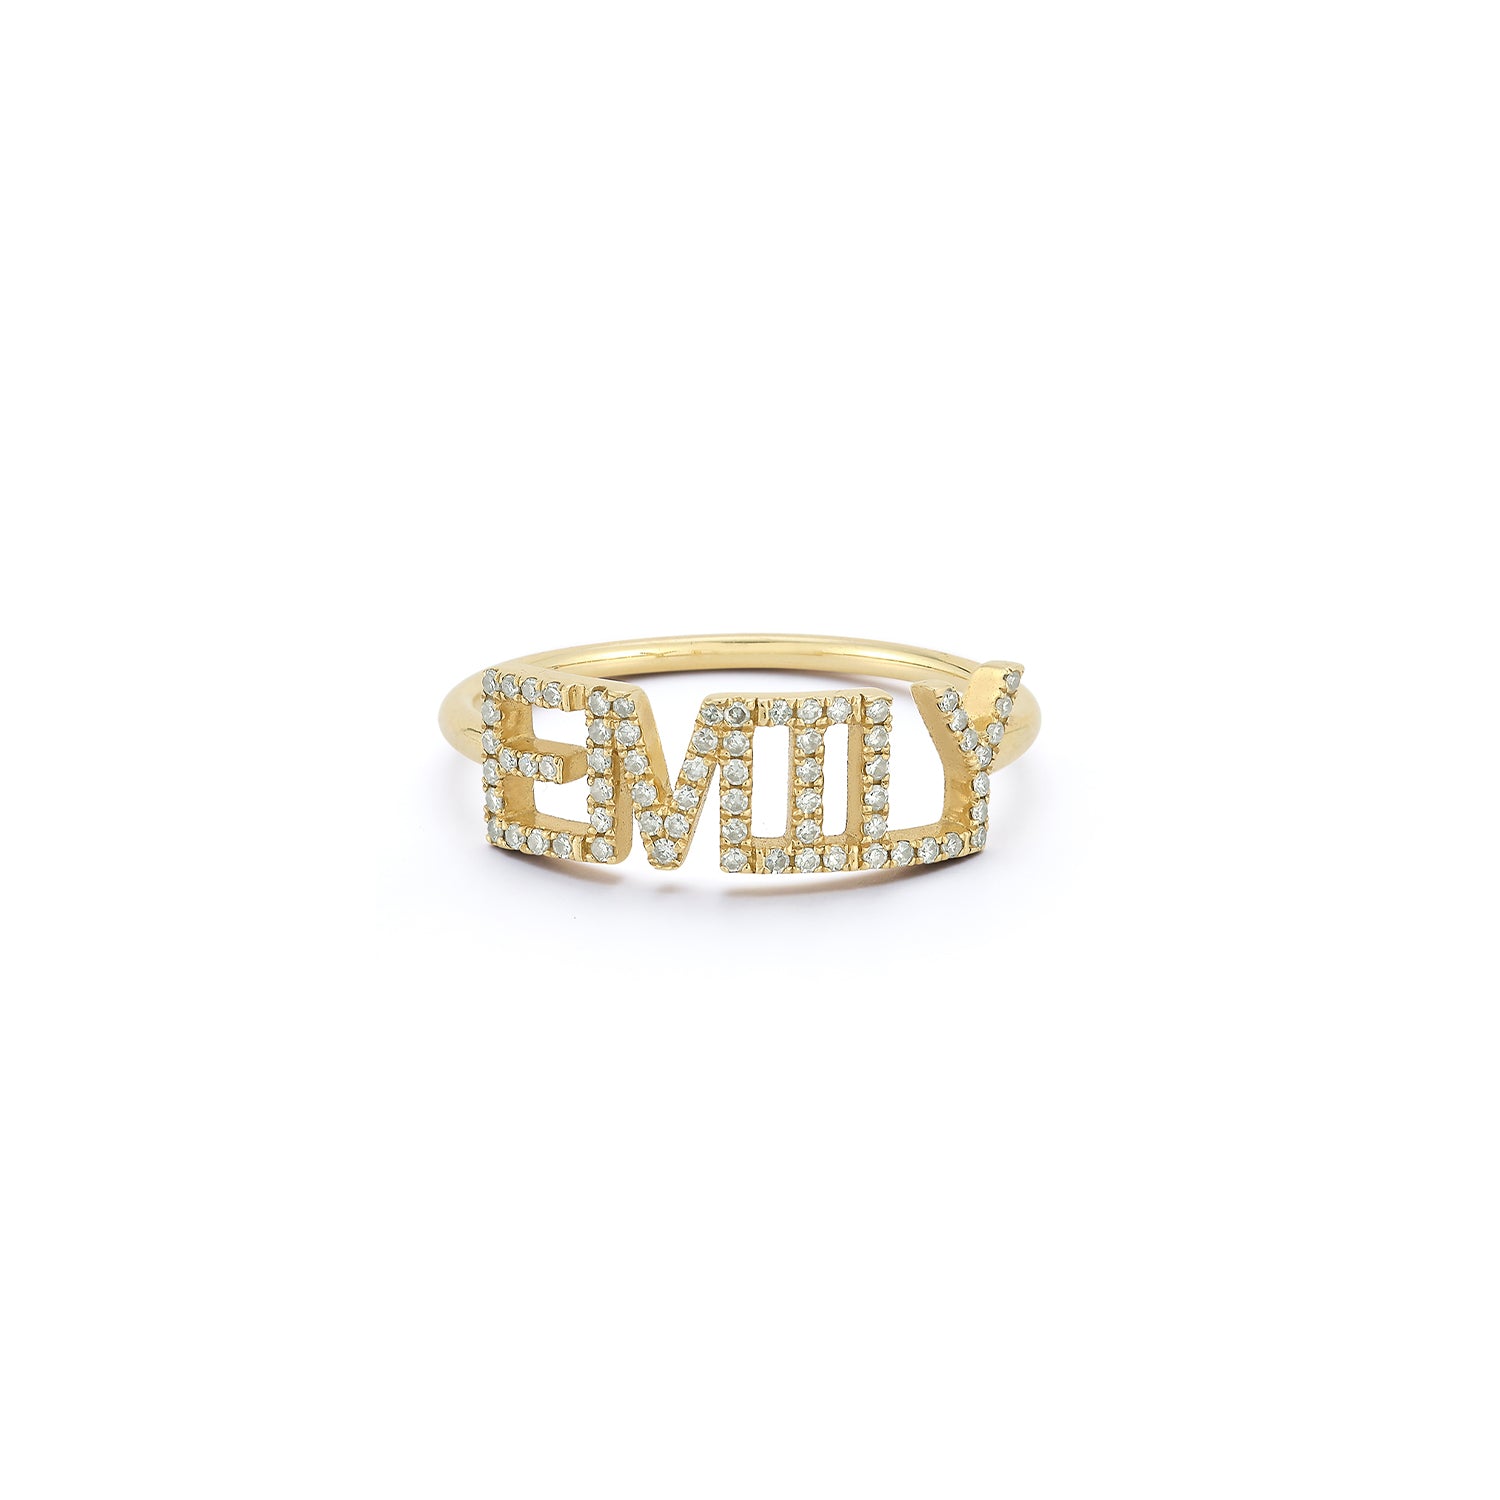 Personalized Block-Letter Name Ring in 14K Yellow Gold-Plated Sterling  Silver - Walmart.com